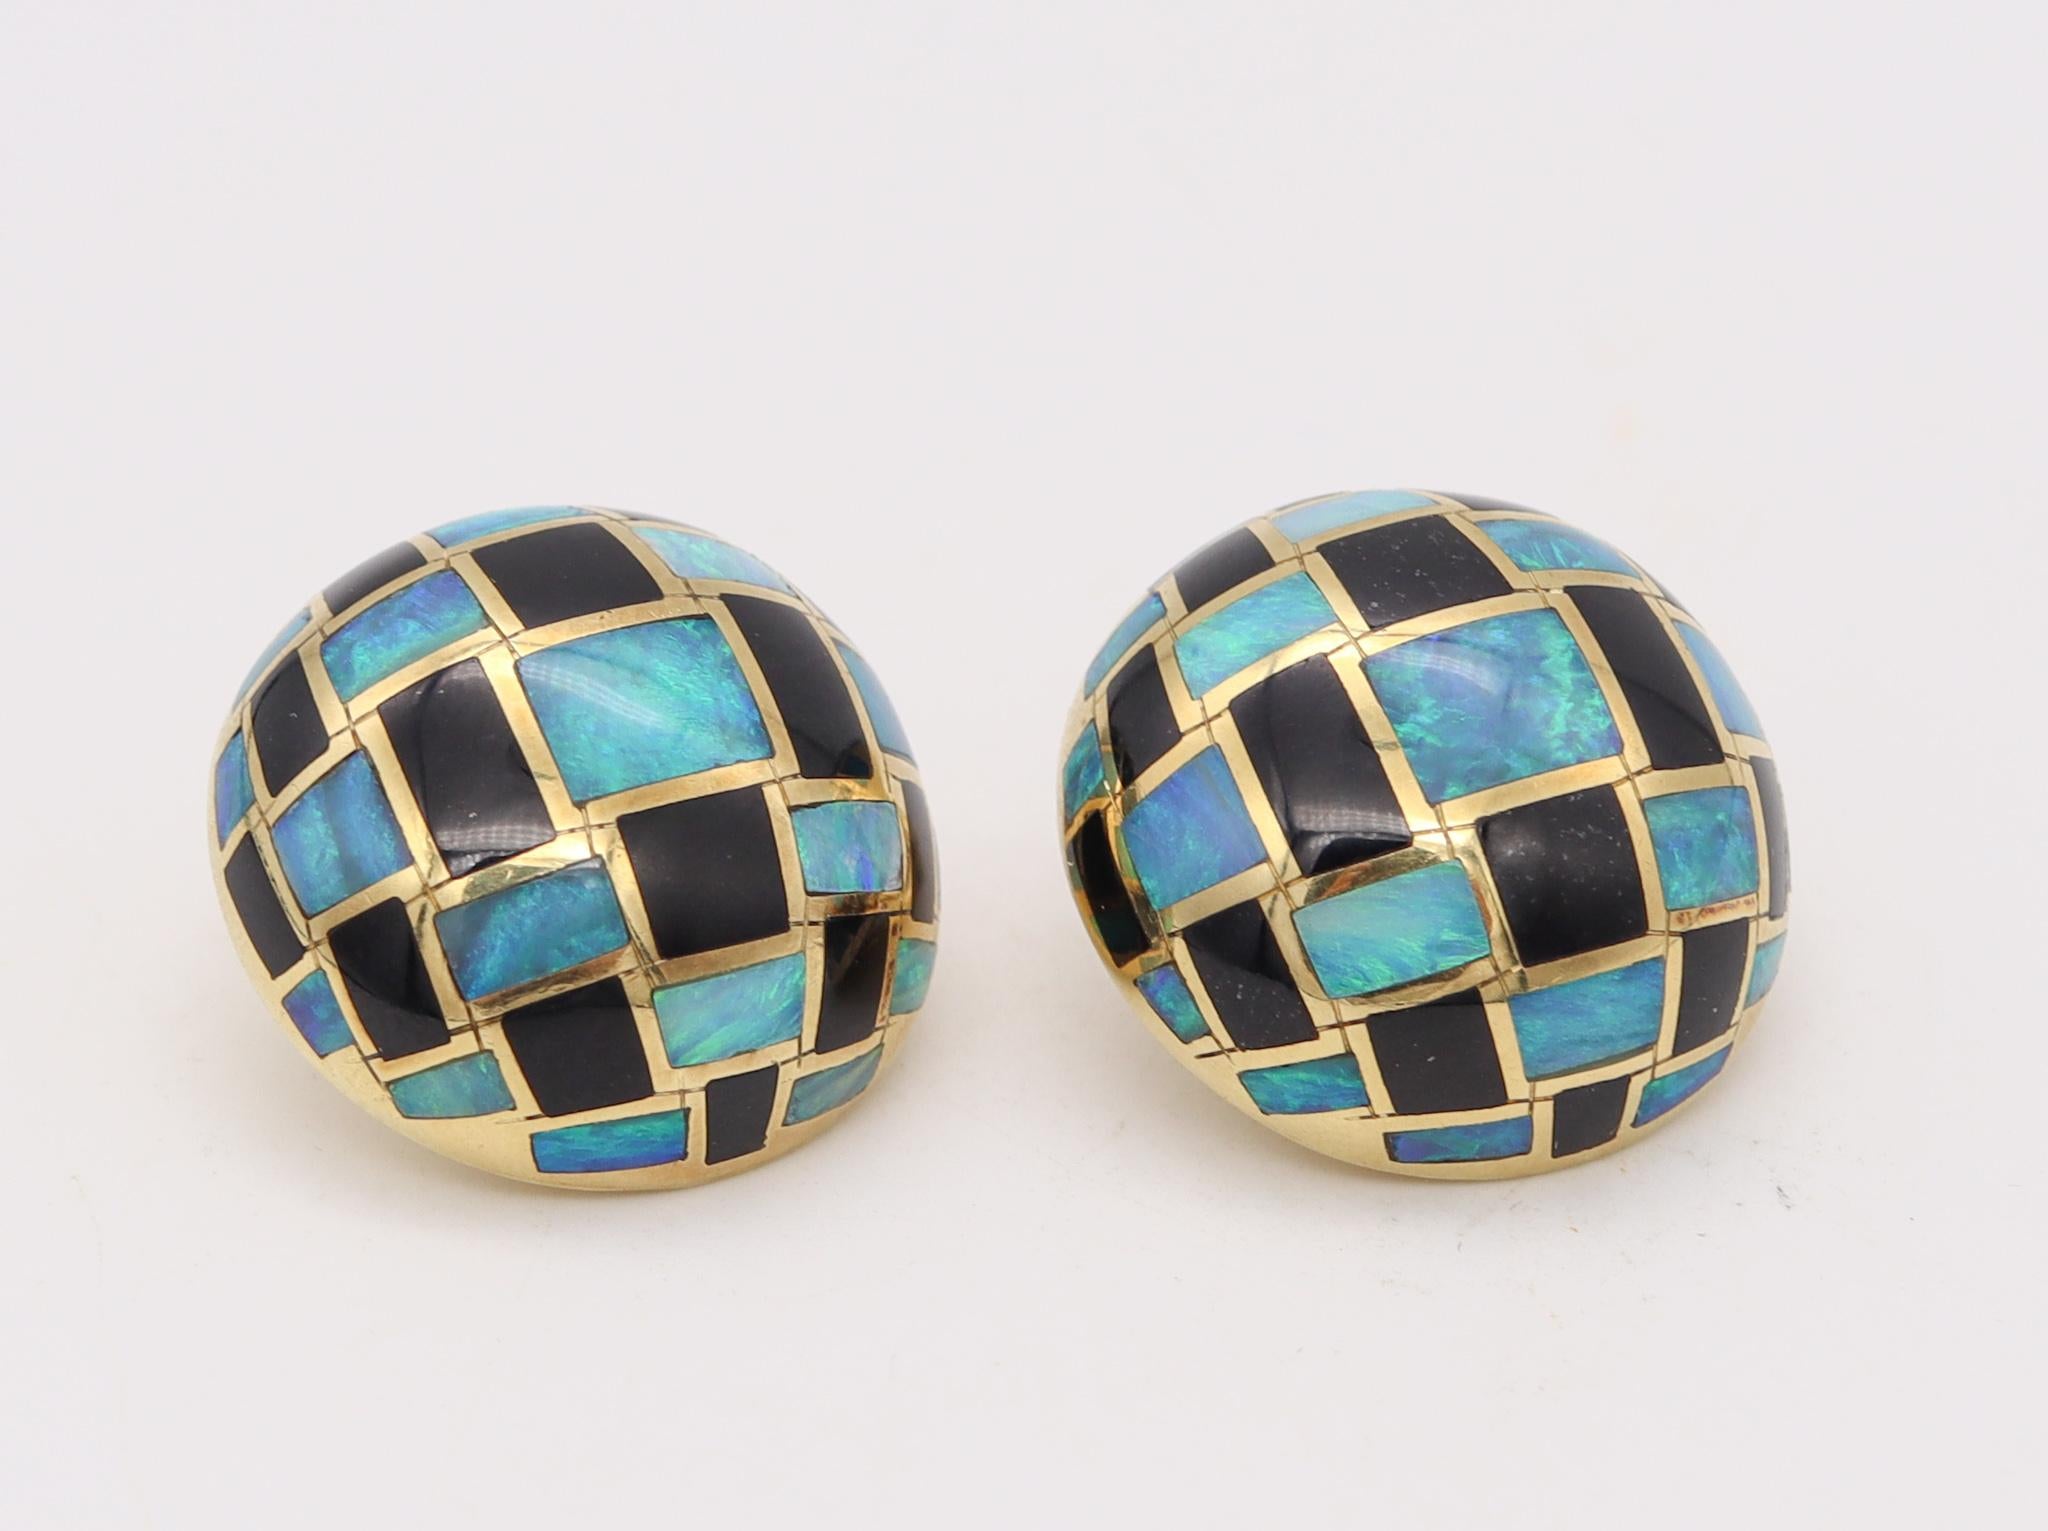 Tiffany Co 1970s Angela Cummings Domed Clip Earrings 18Kt Gold with Opal Jade In Excellent Condition For Sale In Miami, FL